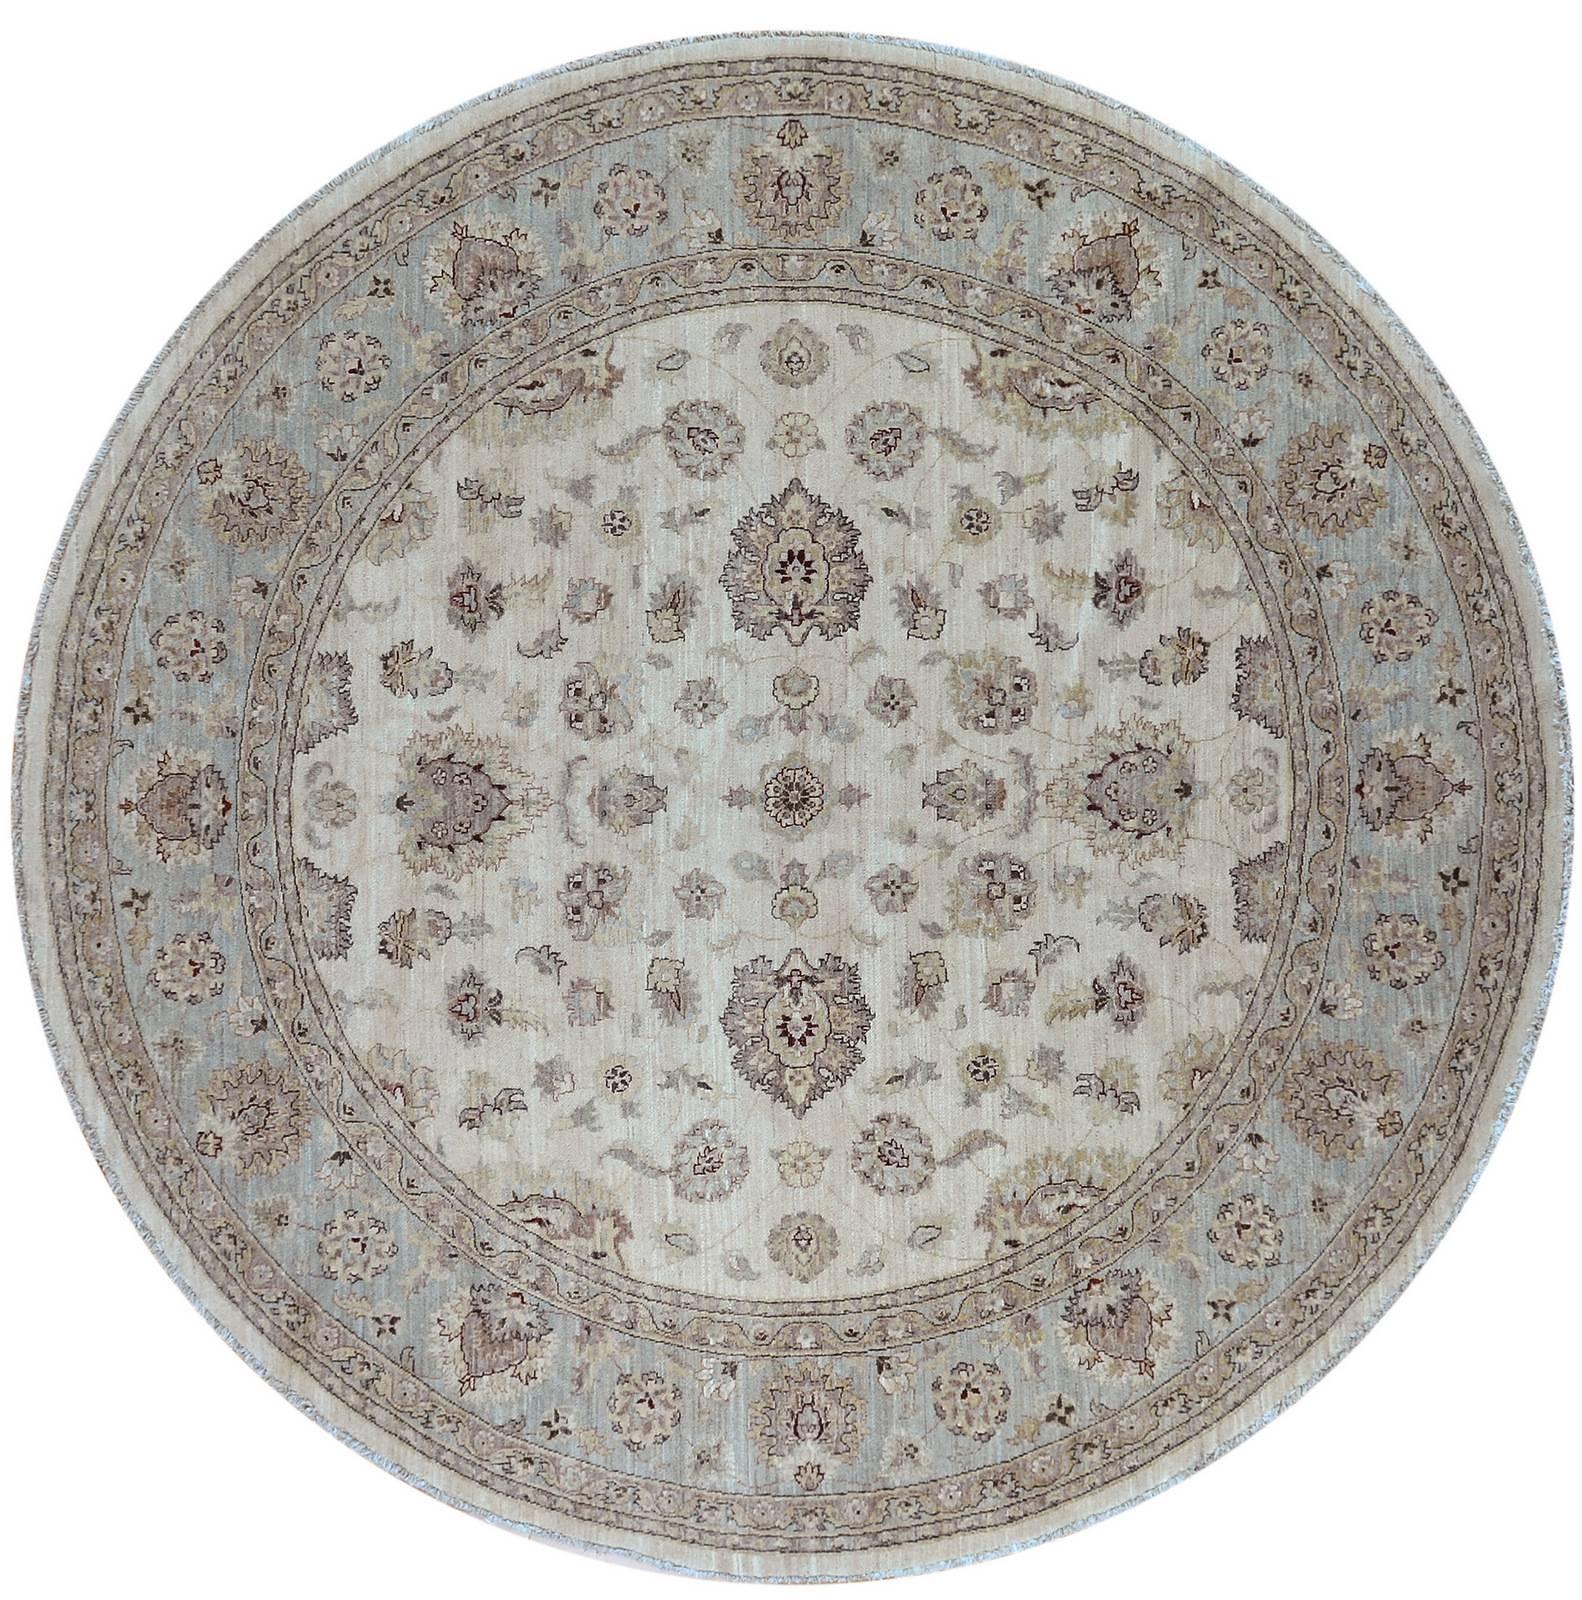 Round Ivory and Blue Floral Pattern Rug